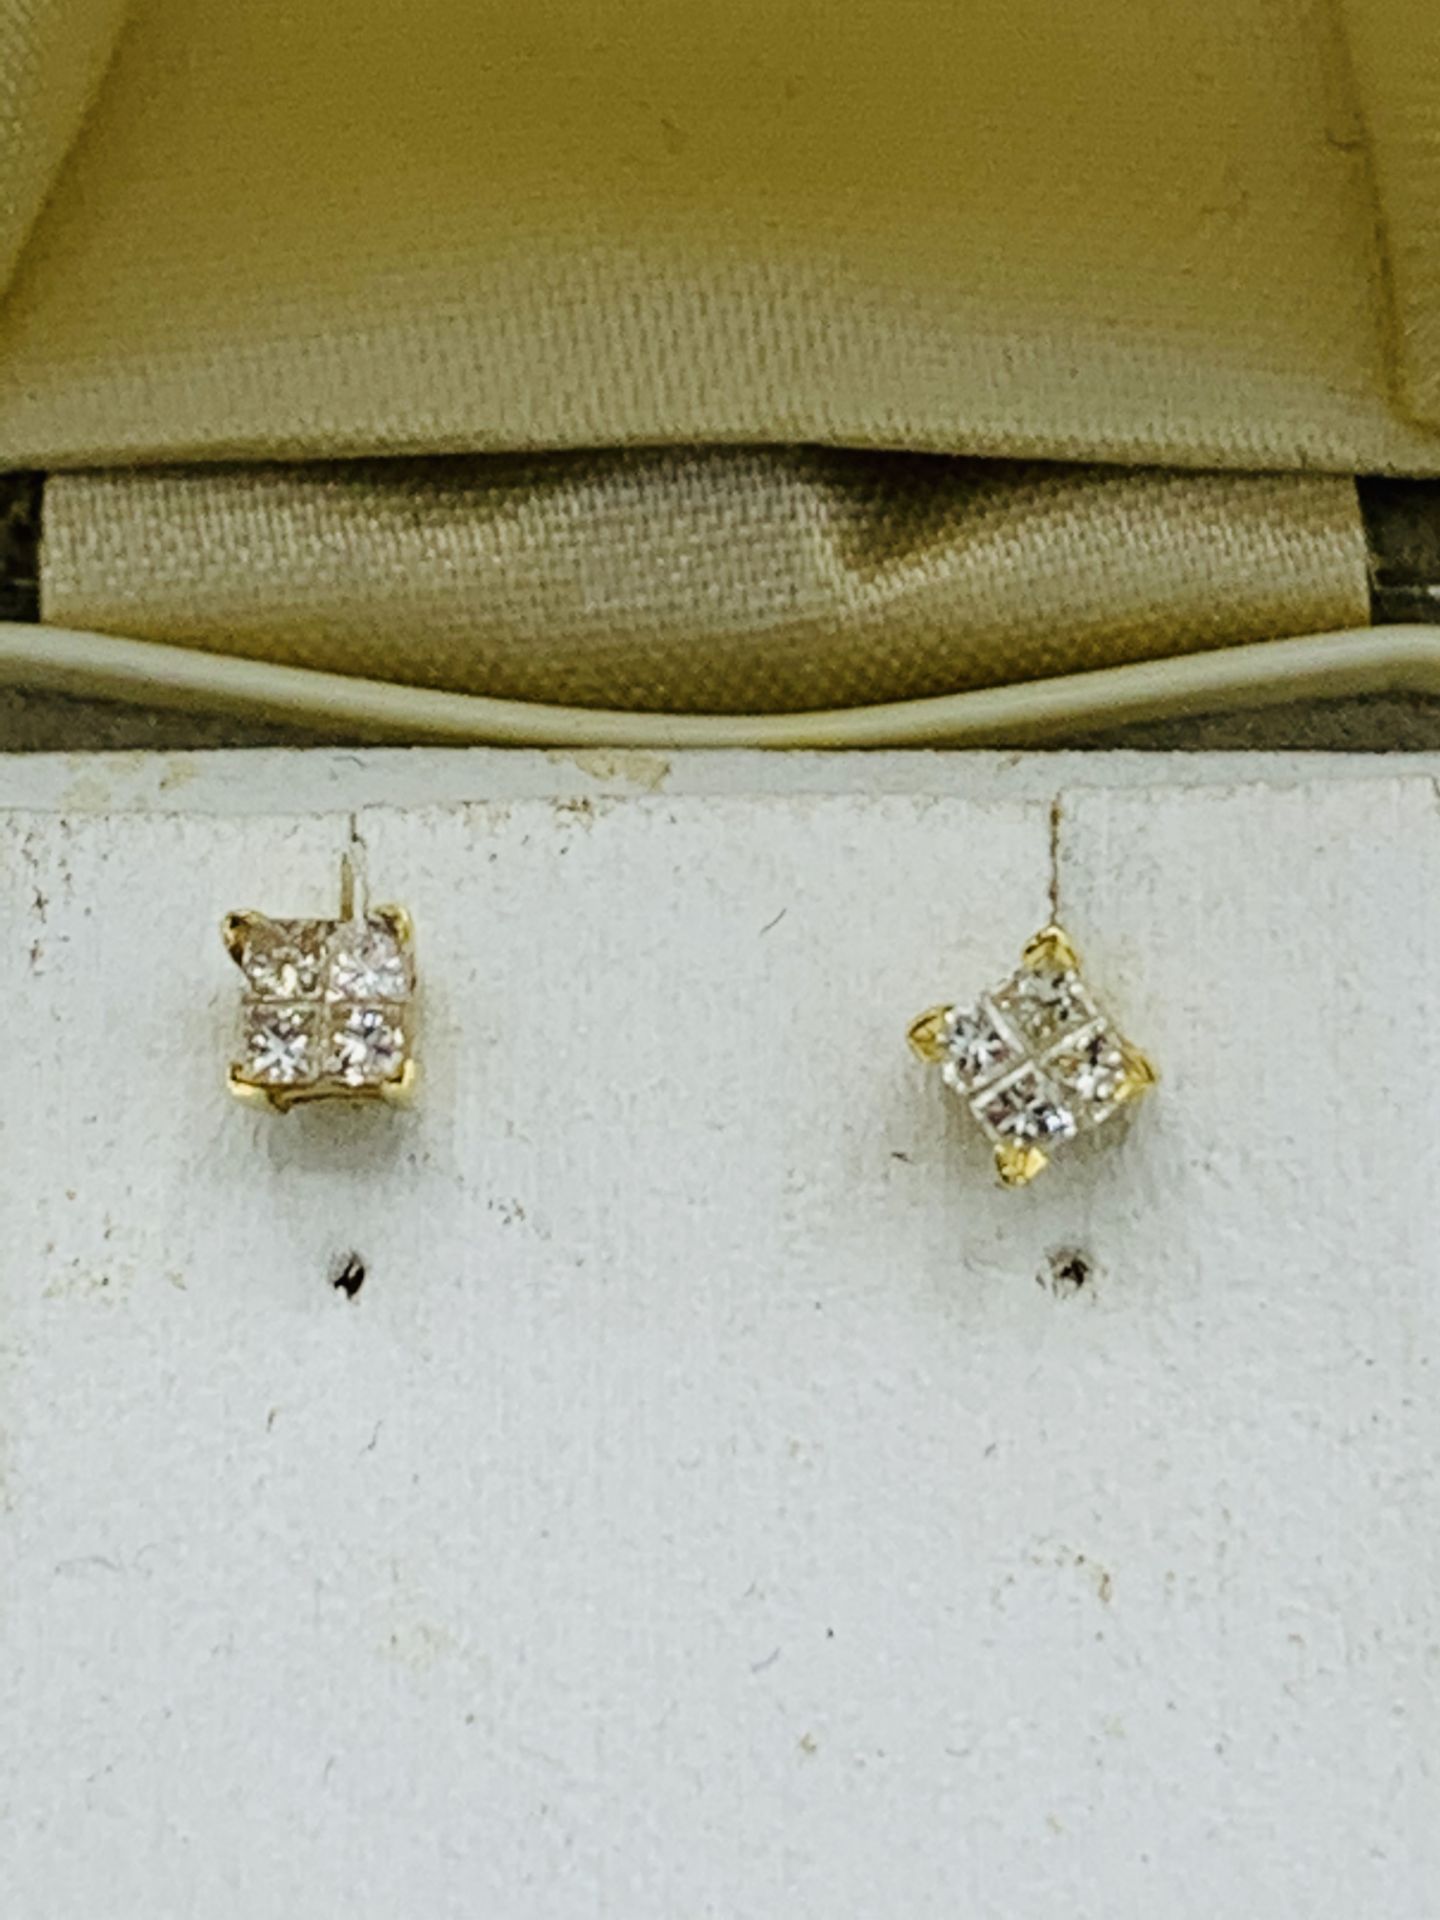 9ct gold and diamond stud earrings, diamonds approx 1/4ct. Estimate £40-50. - Image 2 of 3